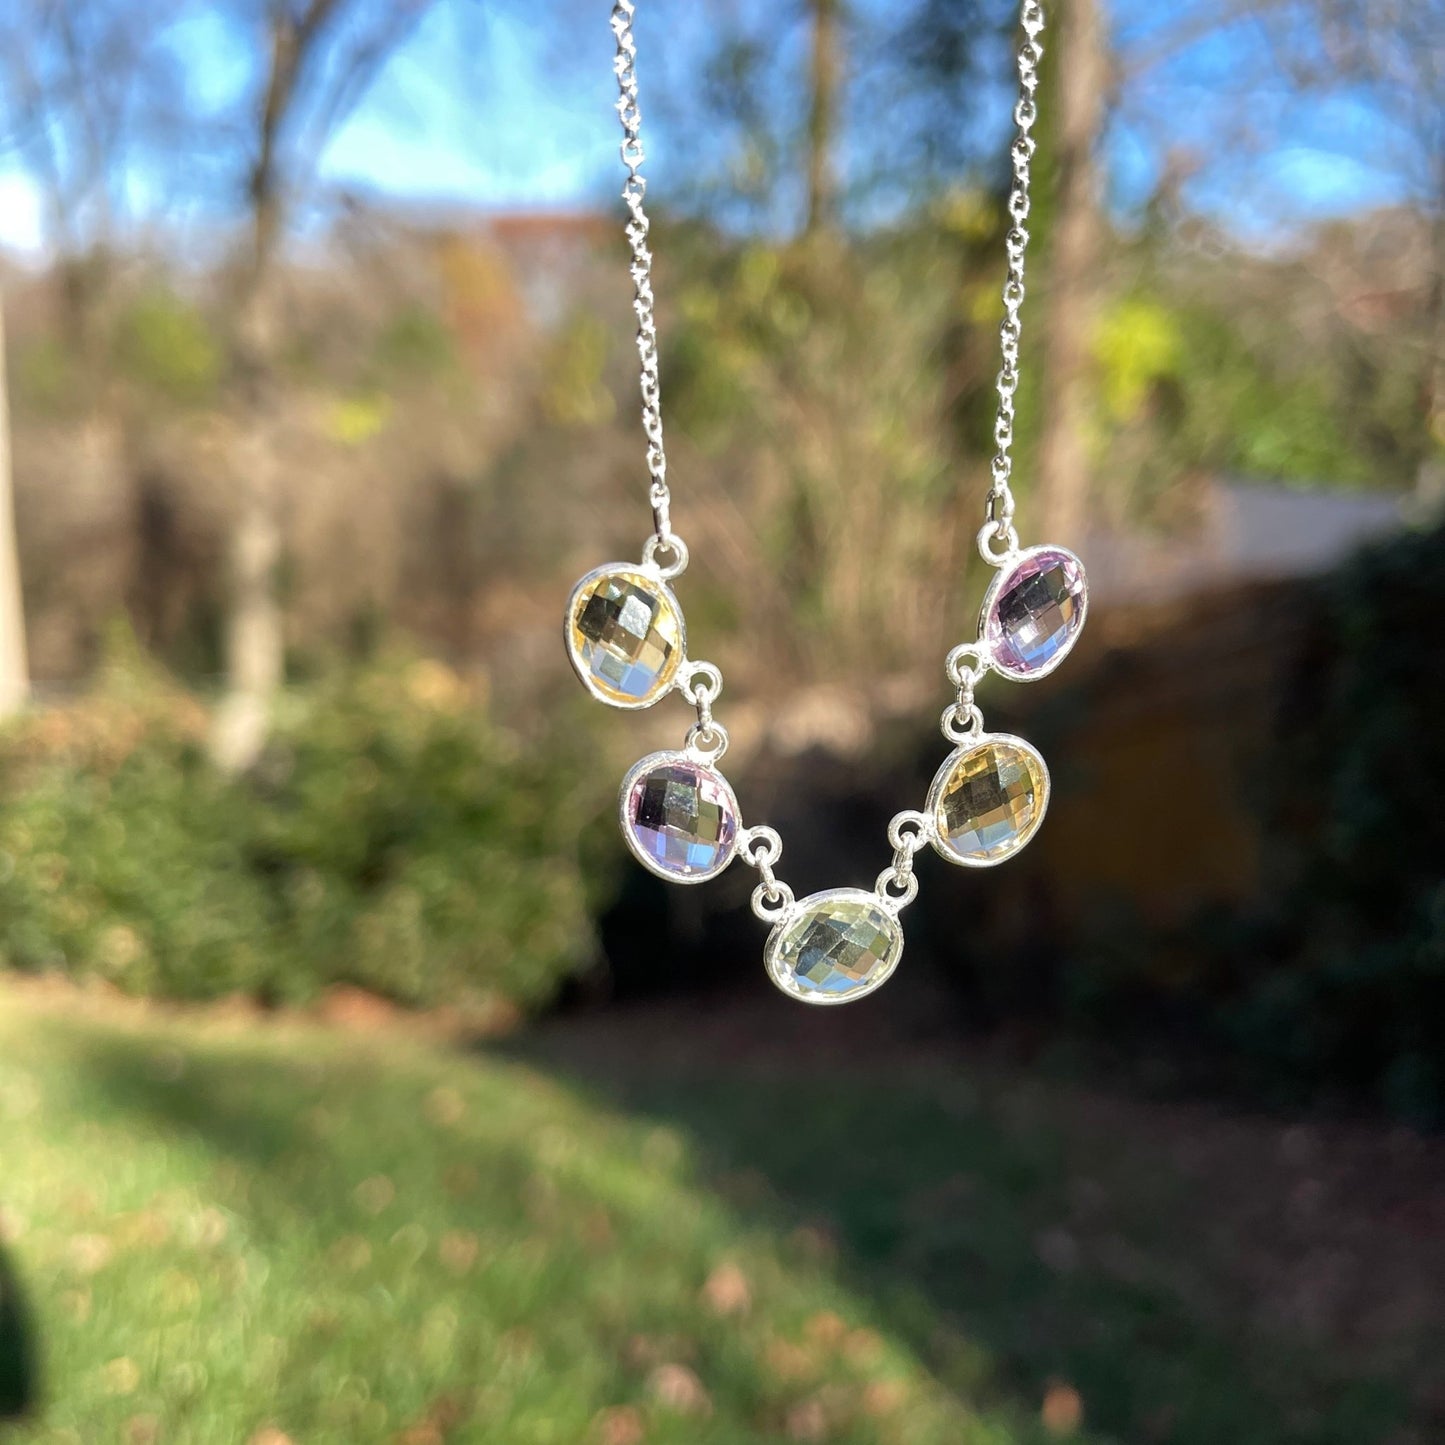 Faceted Gemstone Necklace - Moonstone - Healing Stone Beings